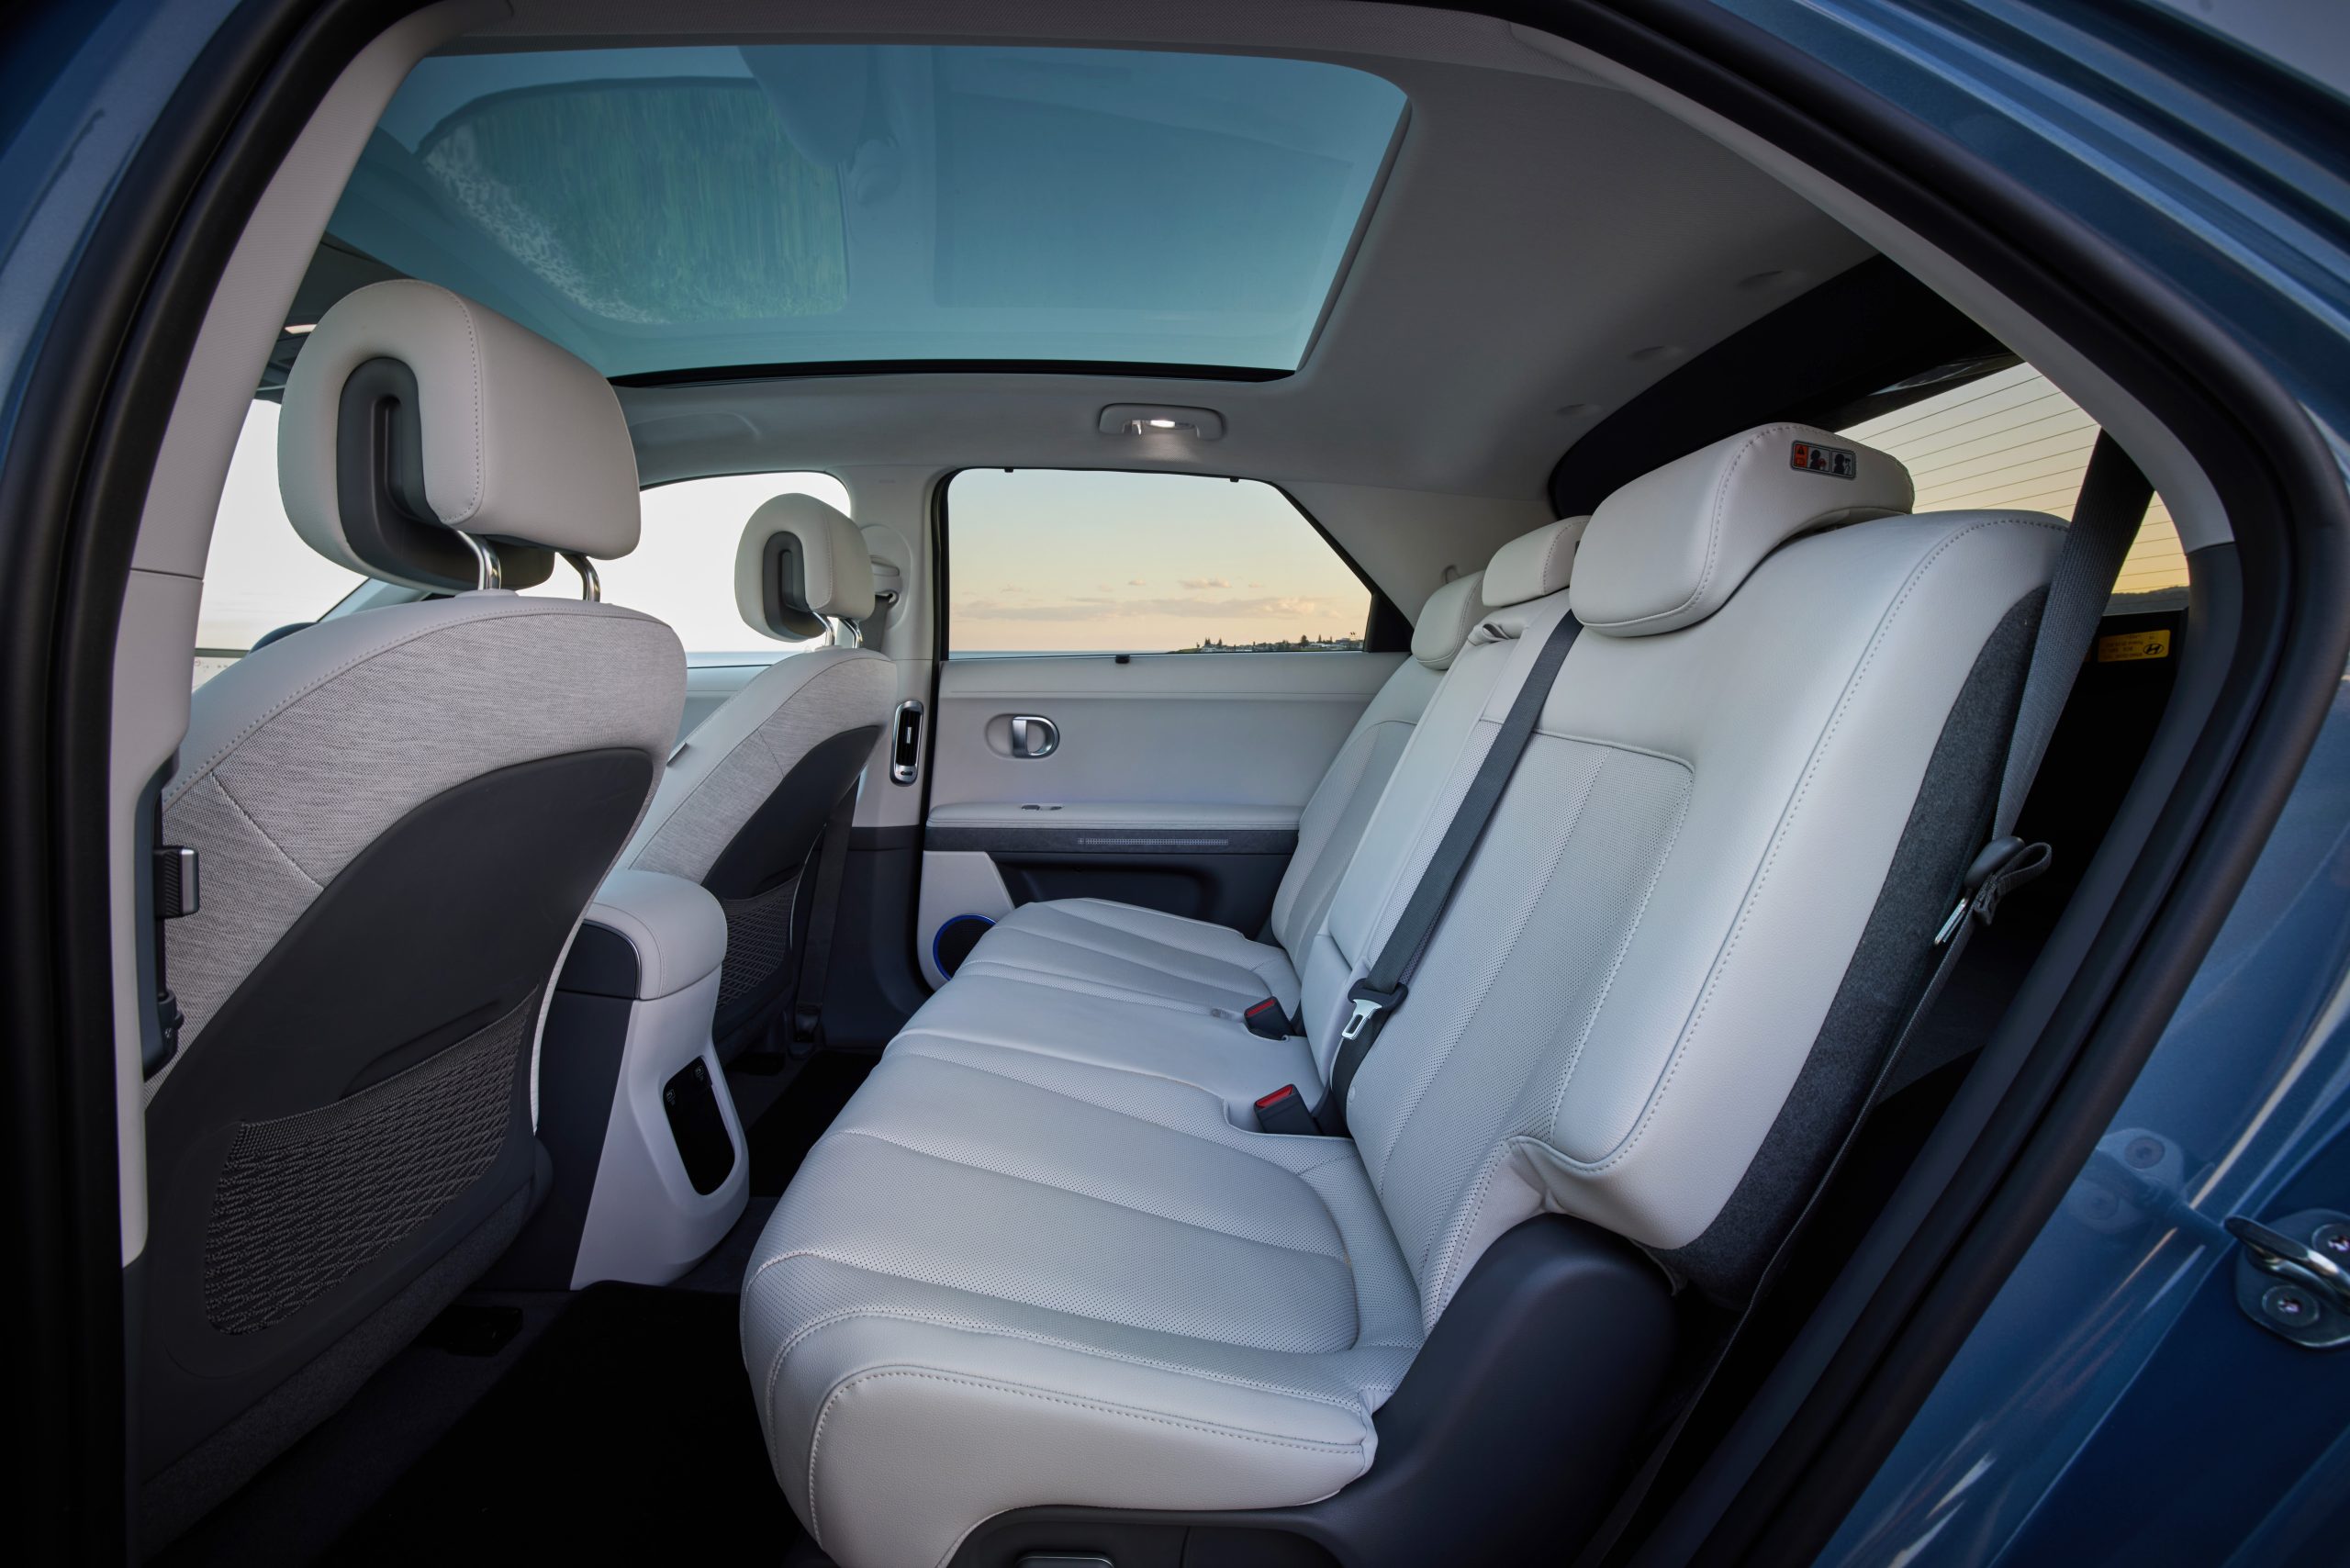 Hyundai IONIQ 5 inside cabin view looking across rear passenger and driver's white leather seats from door